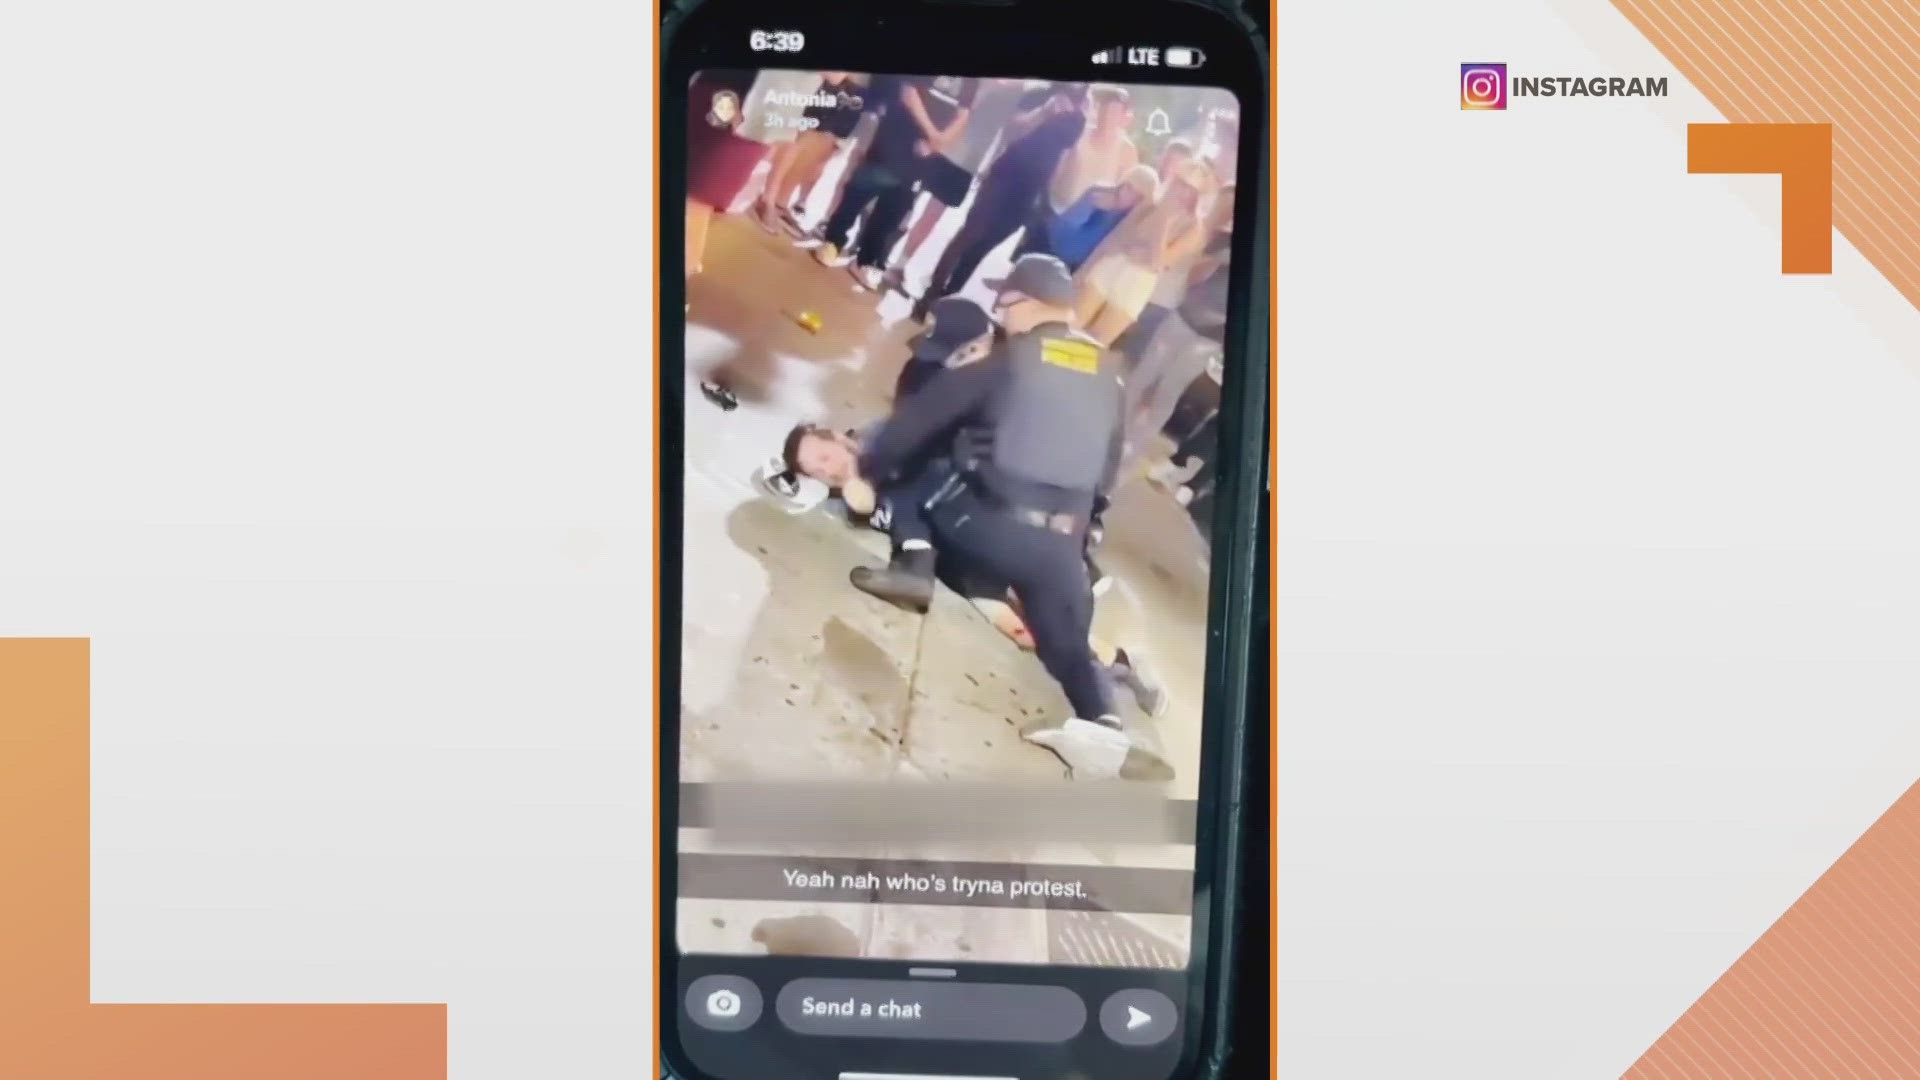 The video shows two officers in Columbia, Mo. holding a man on the ground while another punches him several times. The video might be disturbing to some